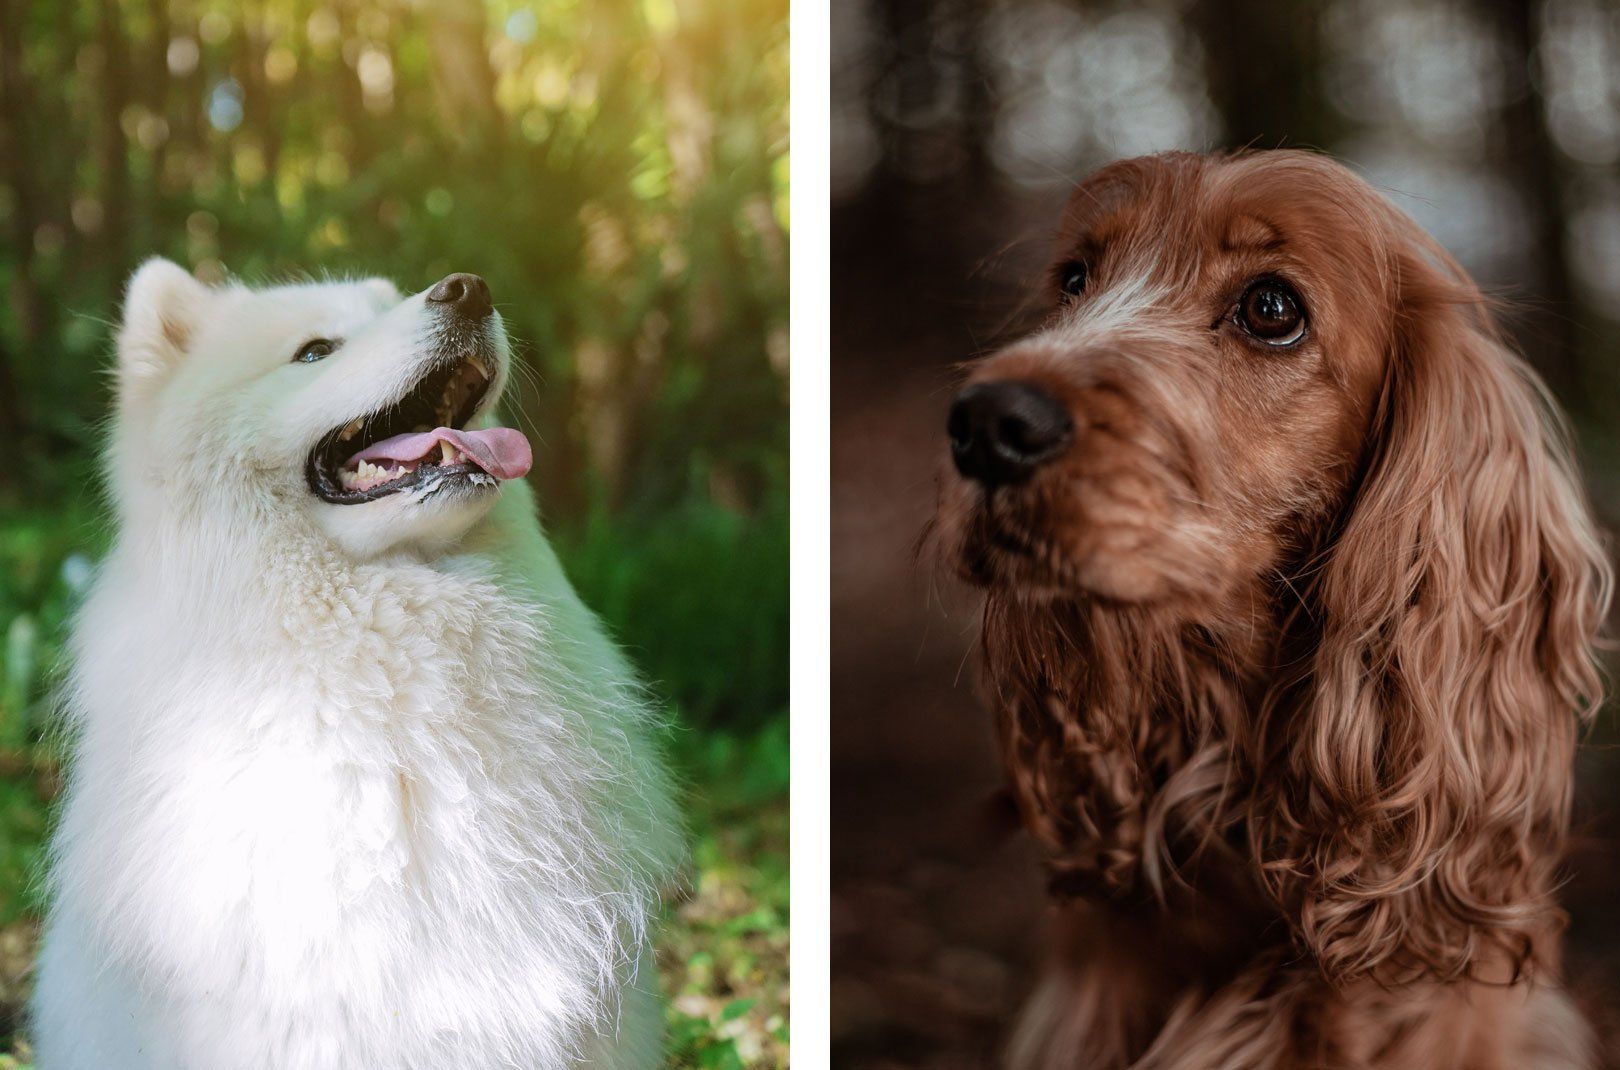 Two separate images of two dogs.